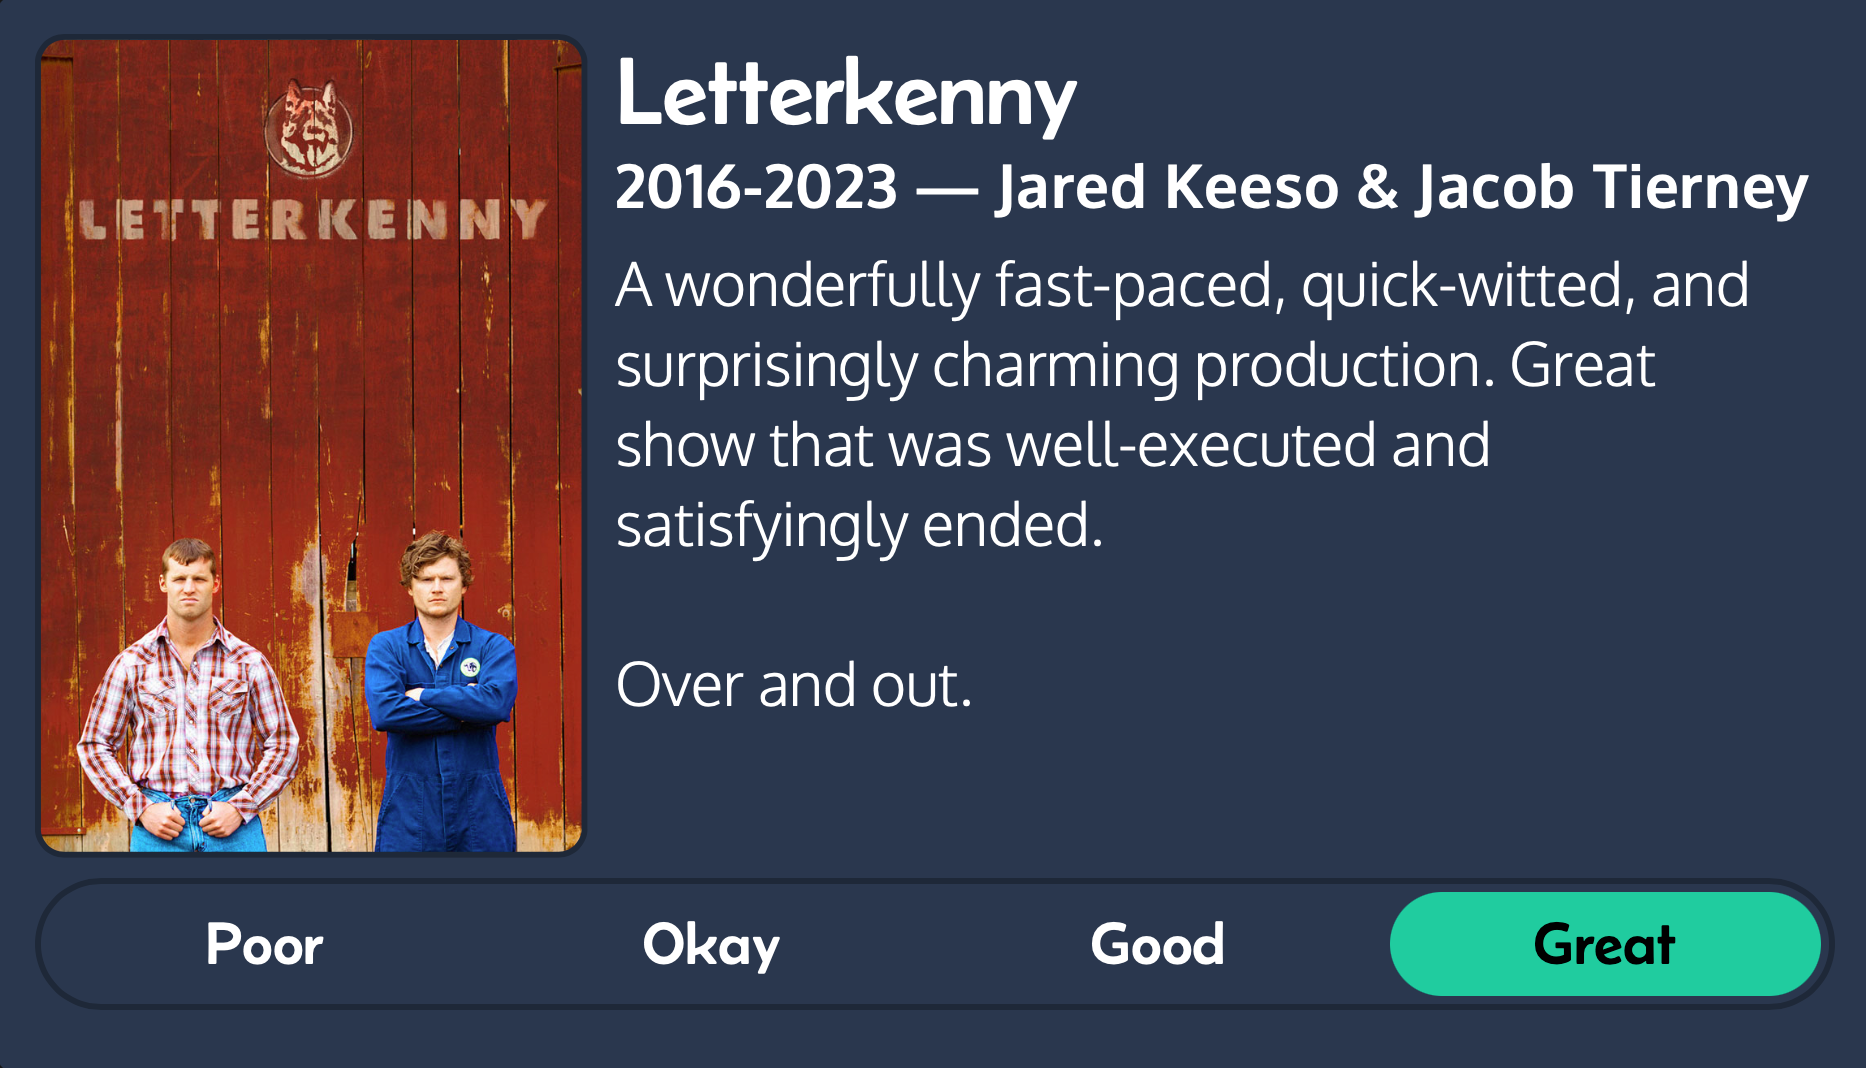 Two men stand arms crossed in front of a red wall with “LETTERKENNY” written on it. Text: “Letterkenny 2016-2023 — Jared Keeso & Jacob Tierney A wonderfully fast-paced, quick-witted, and surprisingly charming production. Great show that was well-executed and satisfyingly ended. Over and out.” Buttons below read “Poor,” “Okay,” and “Good,” with “Great” selected.